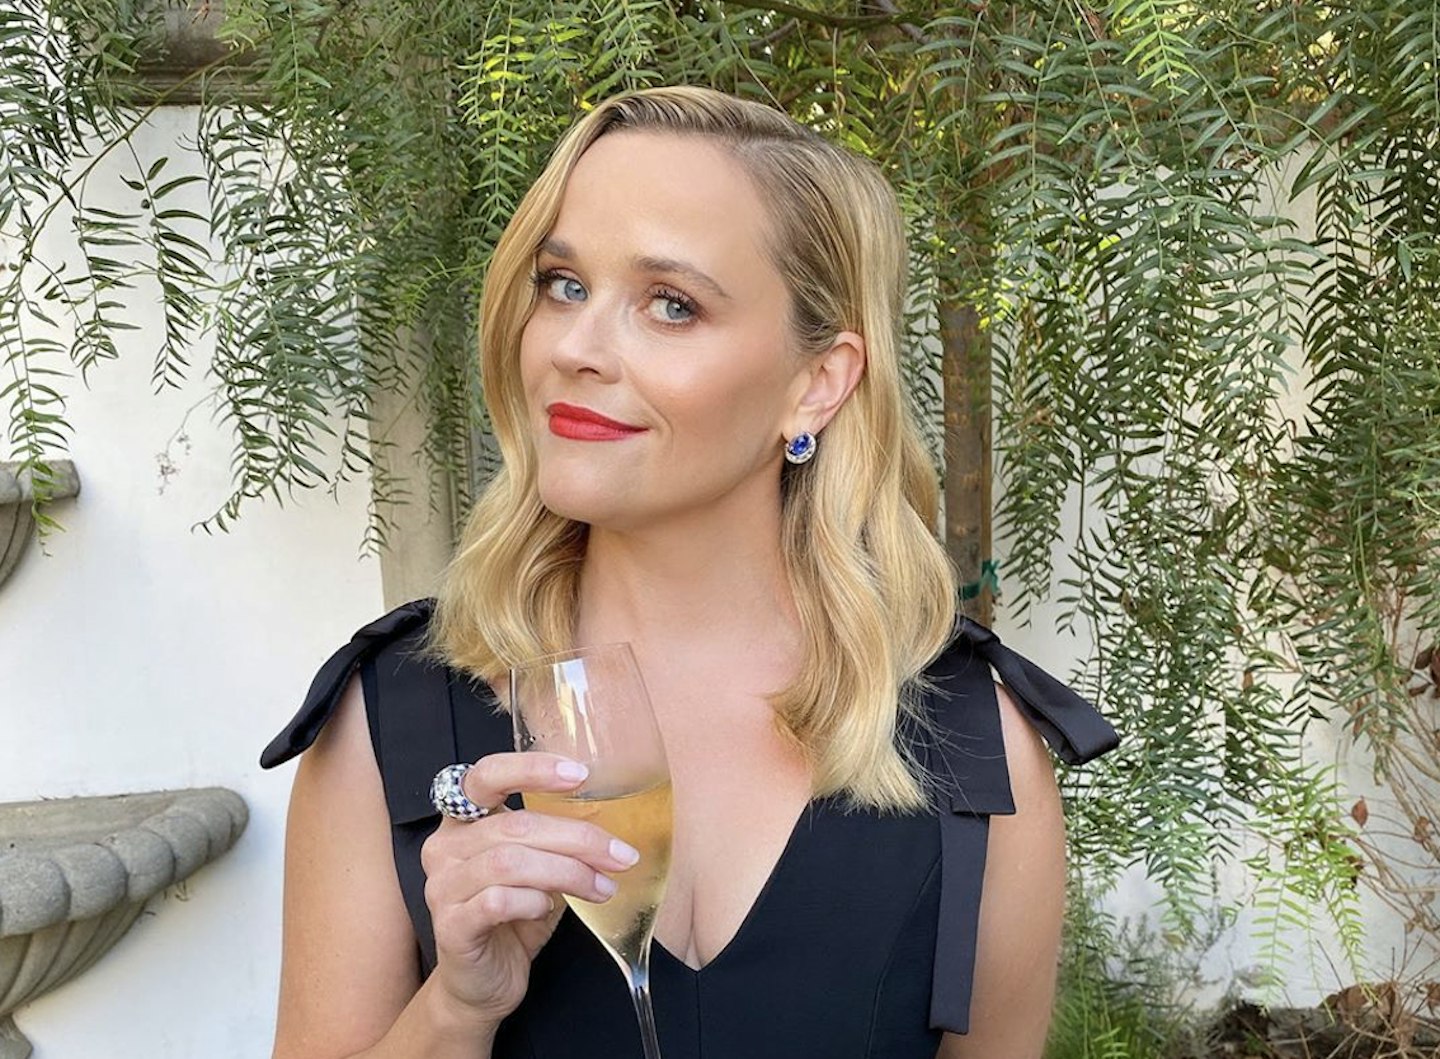 @reesewitherspoon